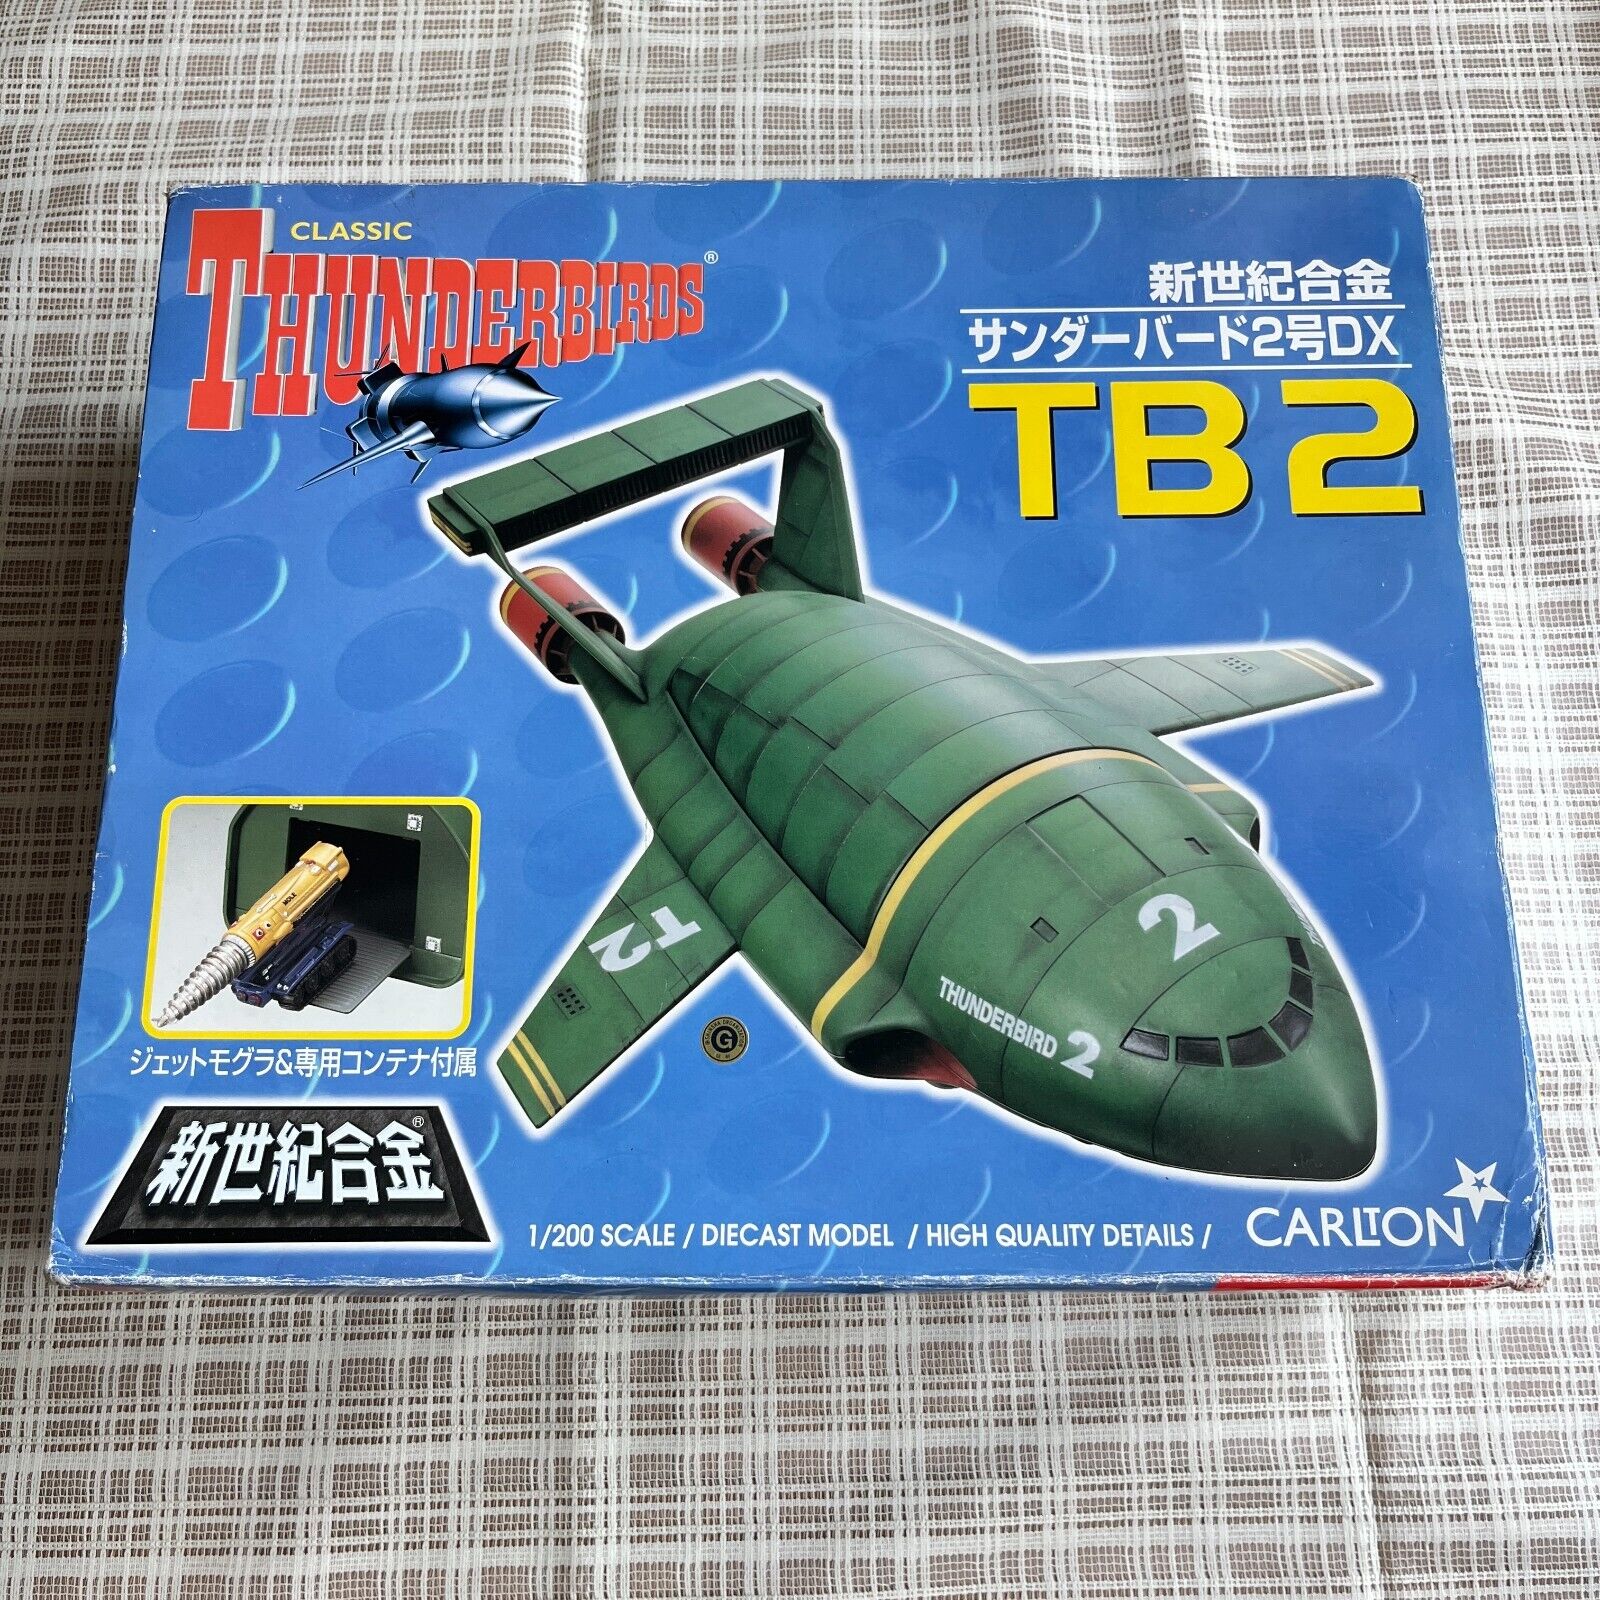 Thunderbirds 2 TB2 with The Mole 1/200 BIG Diecast Detailed Aoshima In stock